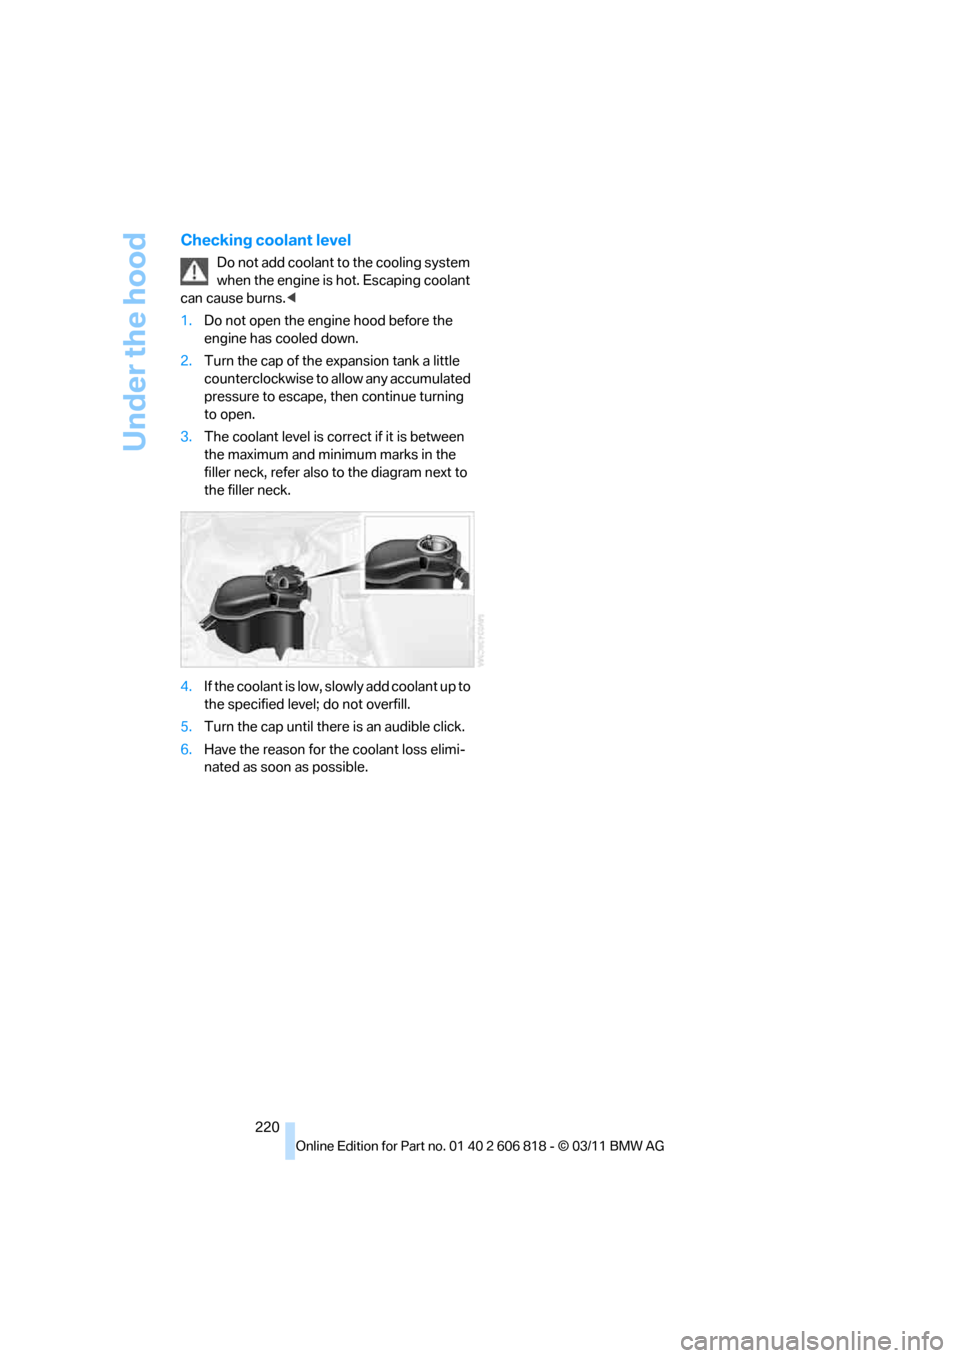 BMW 135I 2012 E88 Owners Manual Under the hood
220
Checking coolant level
Do not add coolant to the cooling system 
when the engine is hot. Escaping coolant 
can cause burns.<
1.Do not open the engine hood before the 
engine has coo